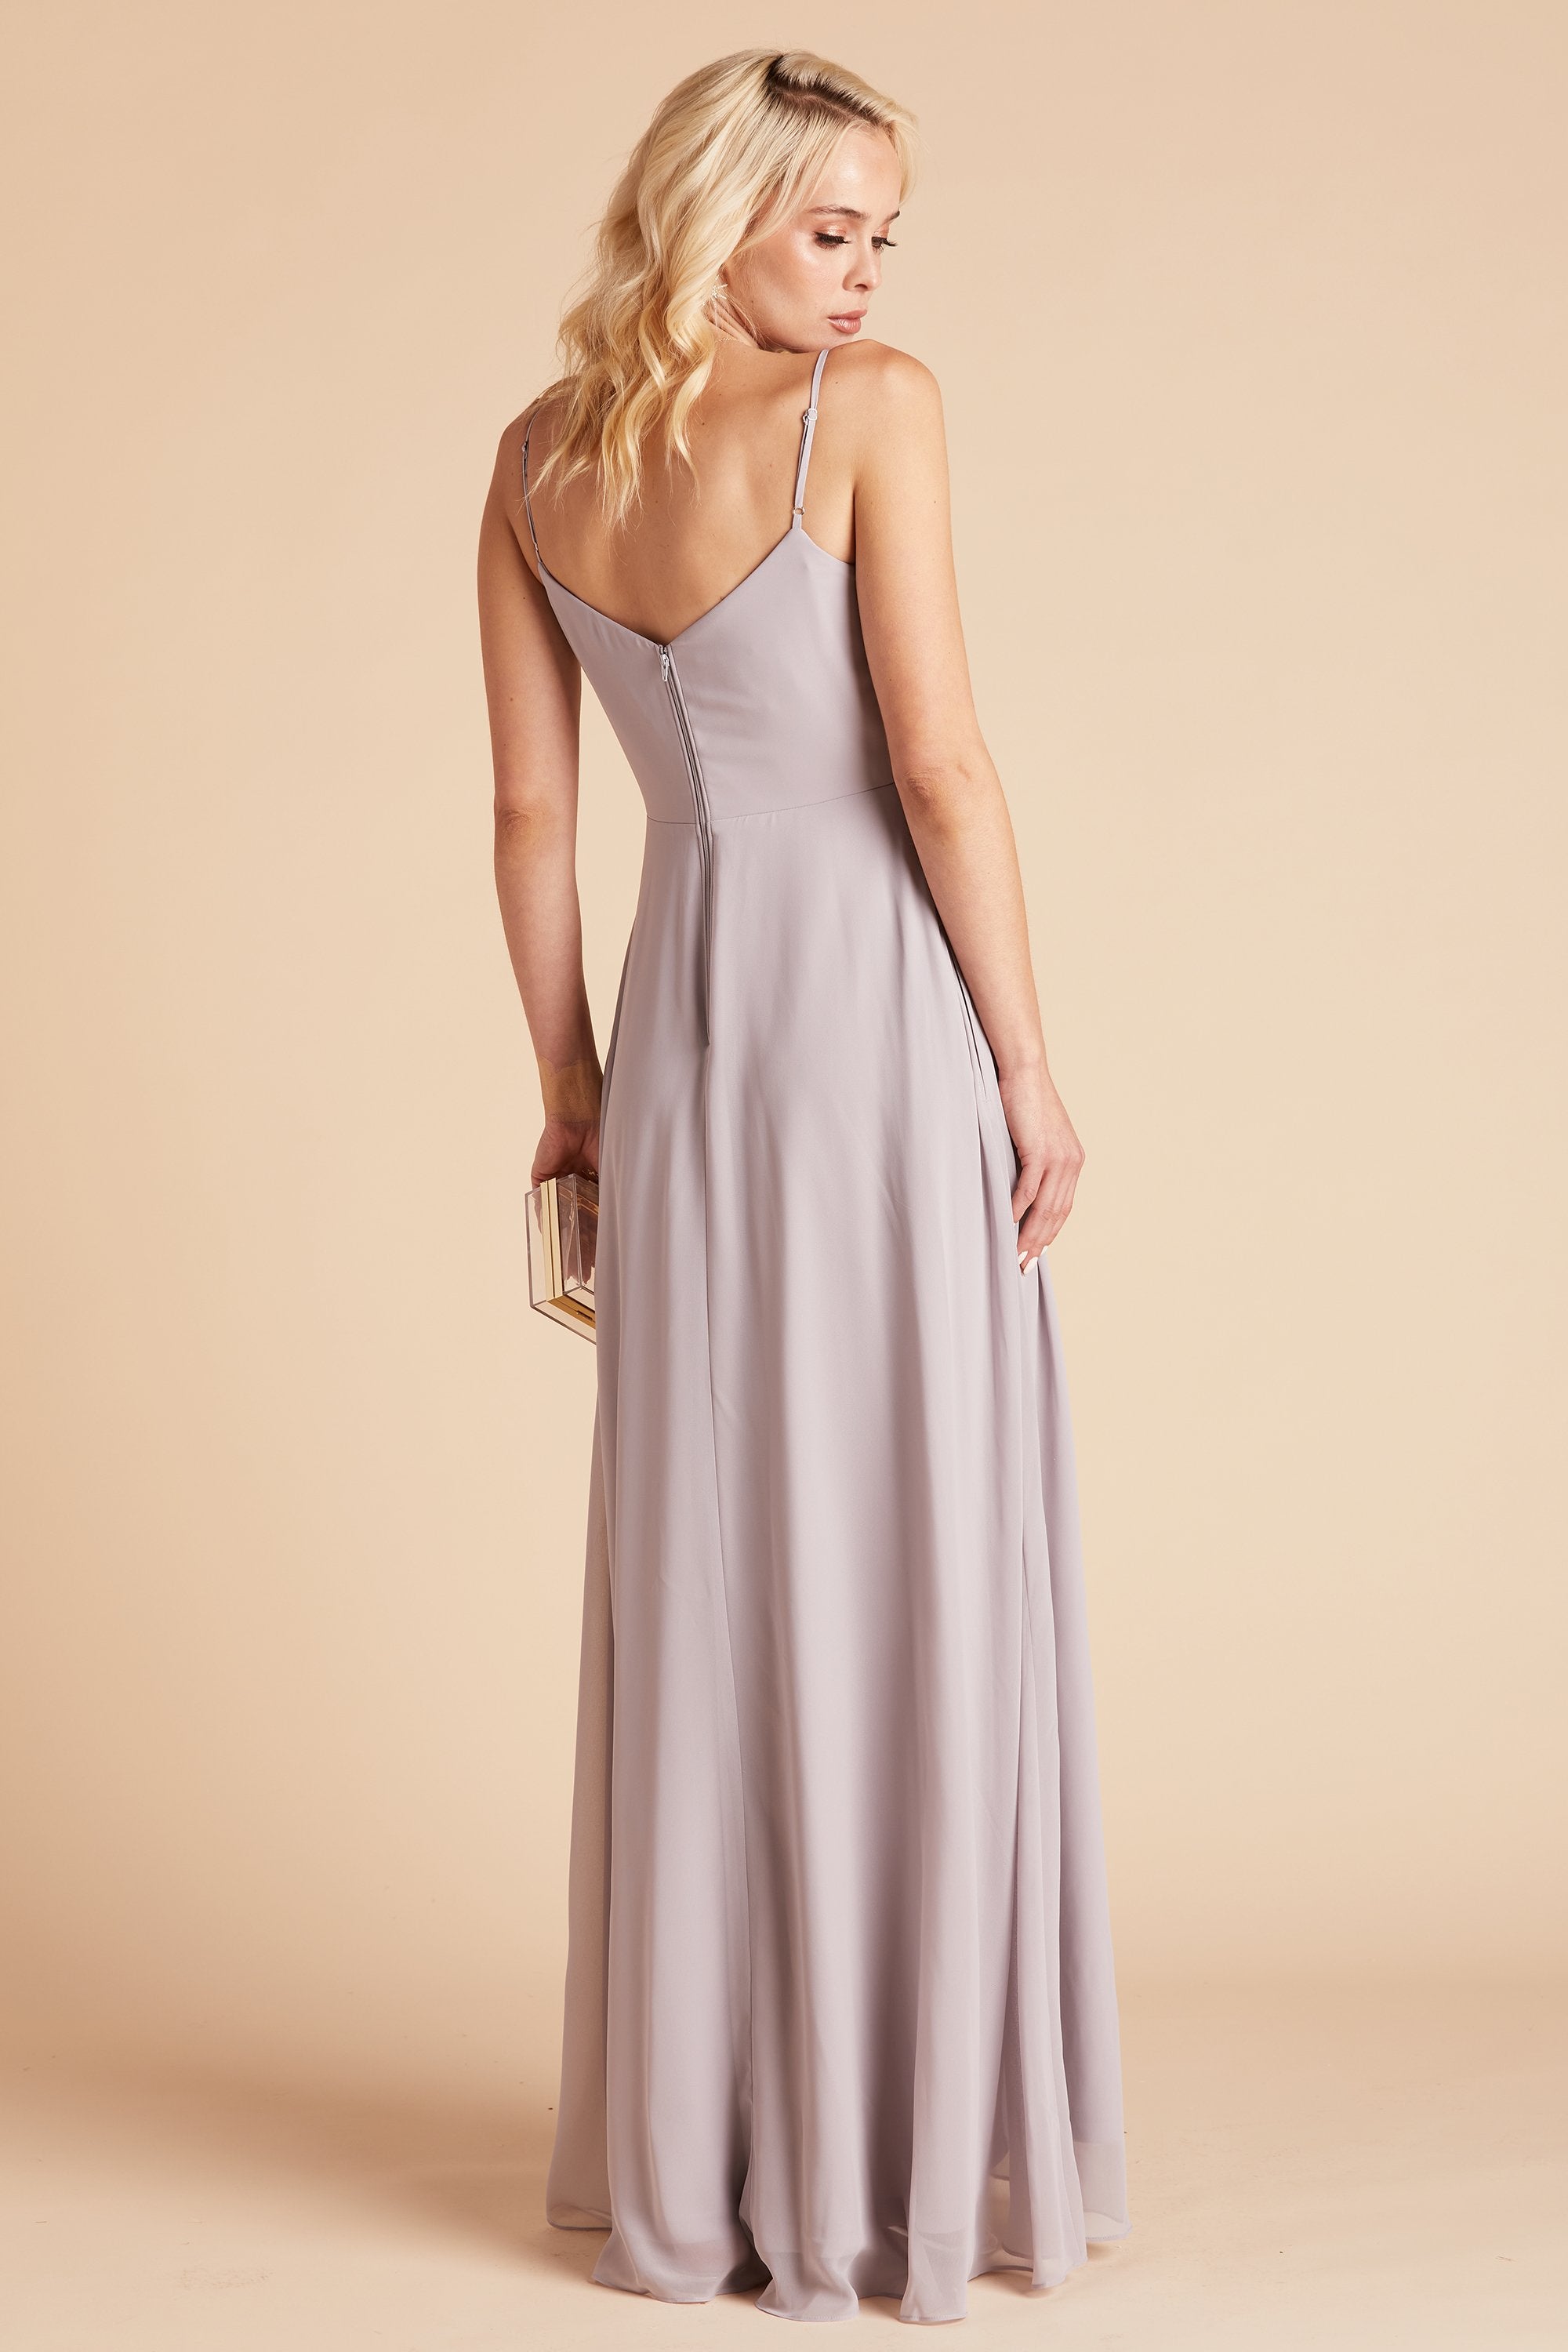 Devin convertible bridesmaids dress in lilac purple chiffon by Birdy Grey, back view